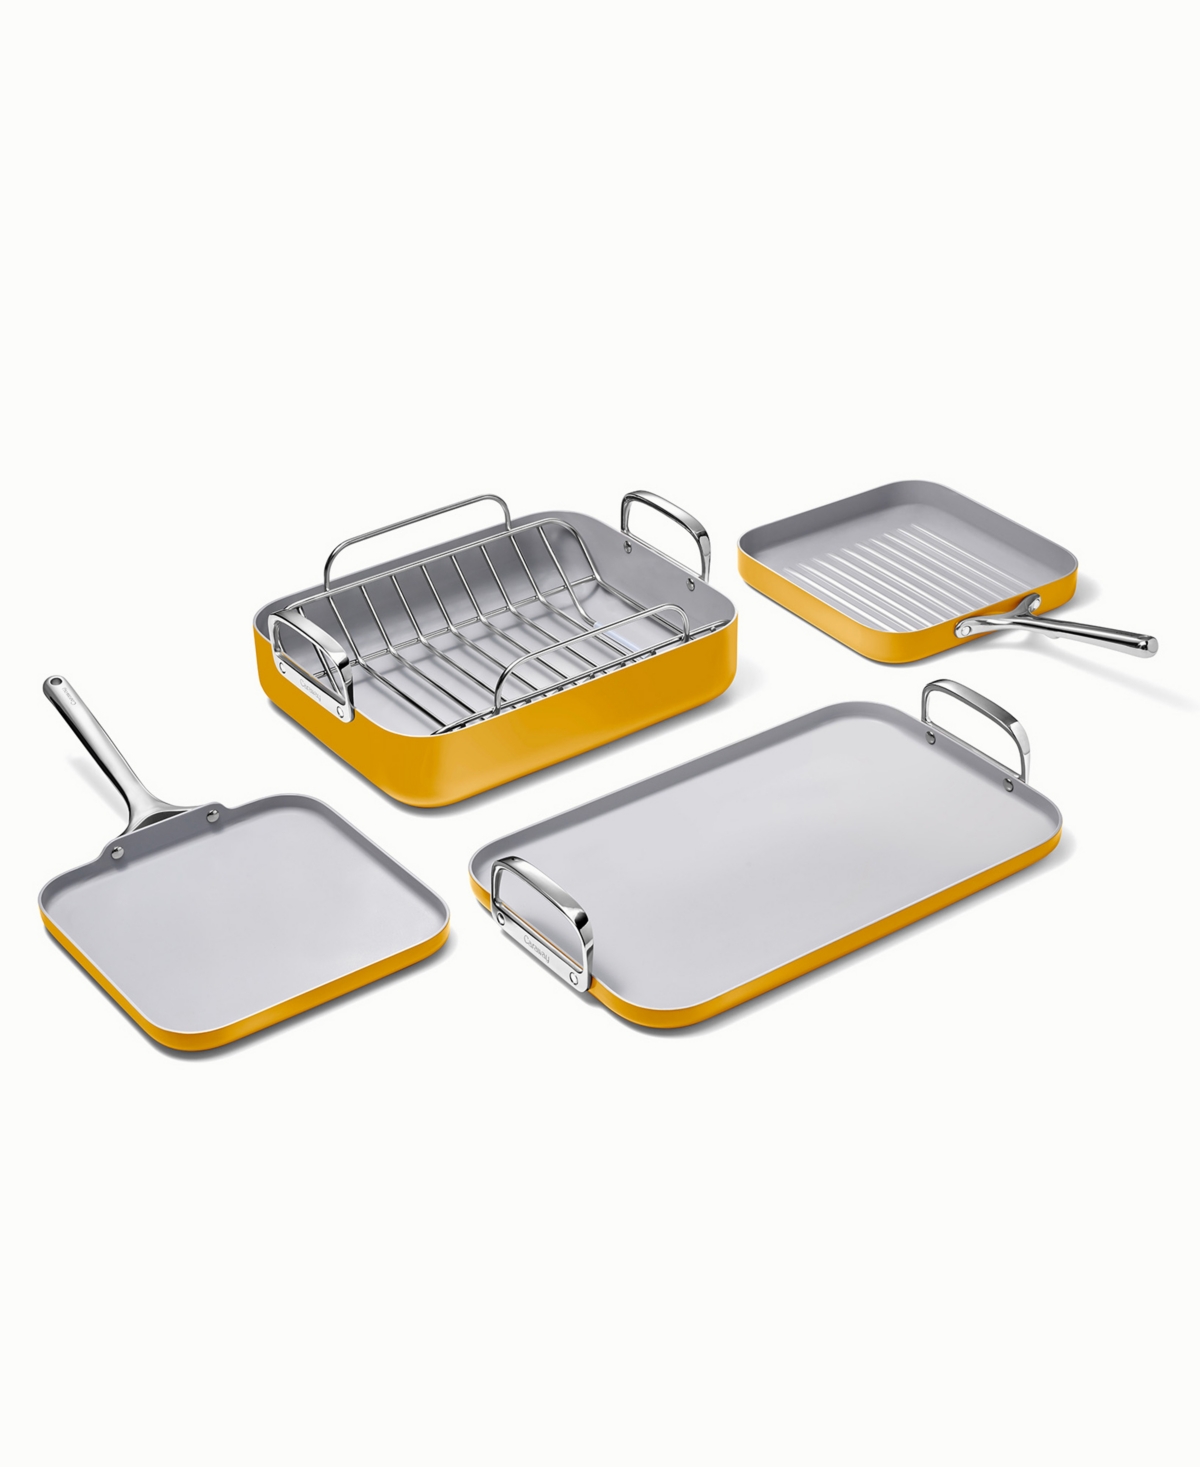 Caraway Harmless Ceramic-coated Non-stick 4-piece Square Cookware Set In Marigold